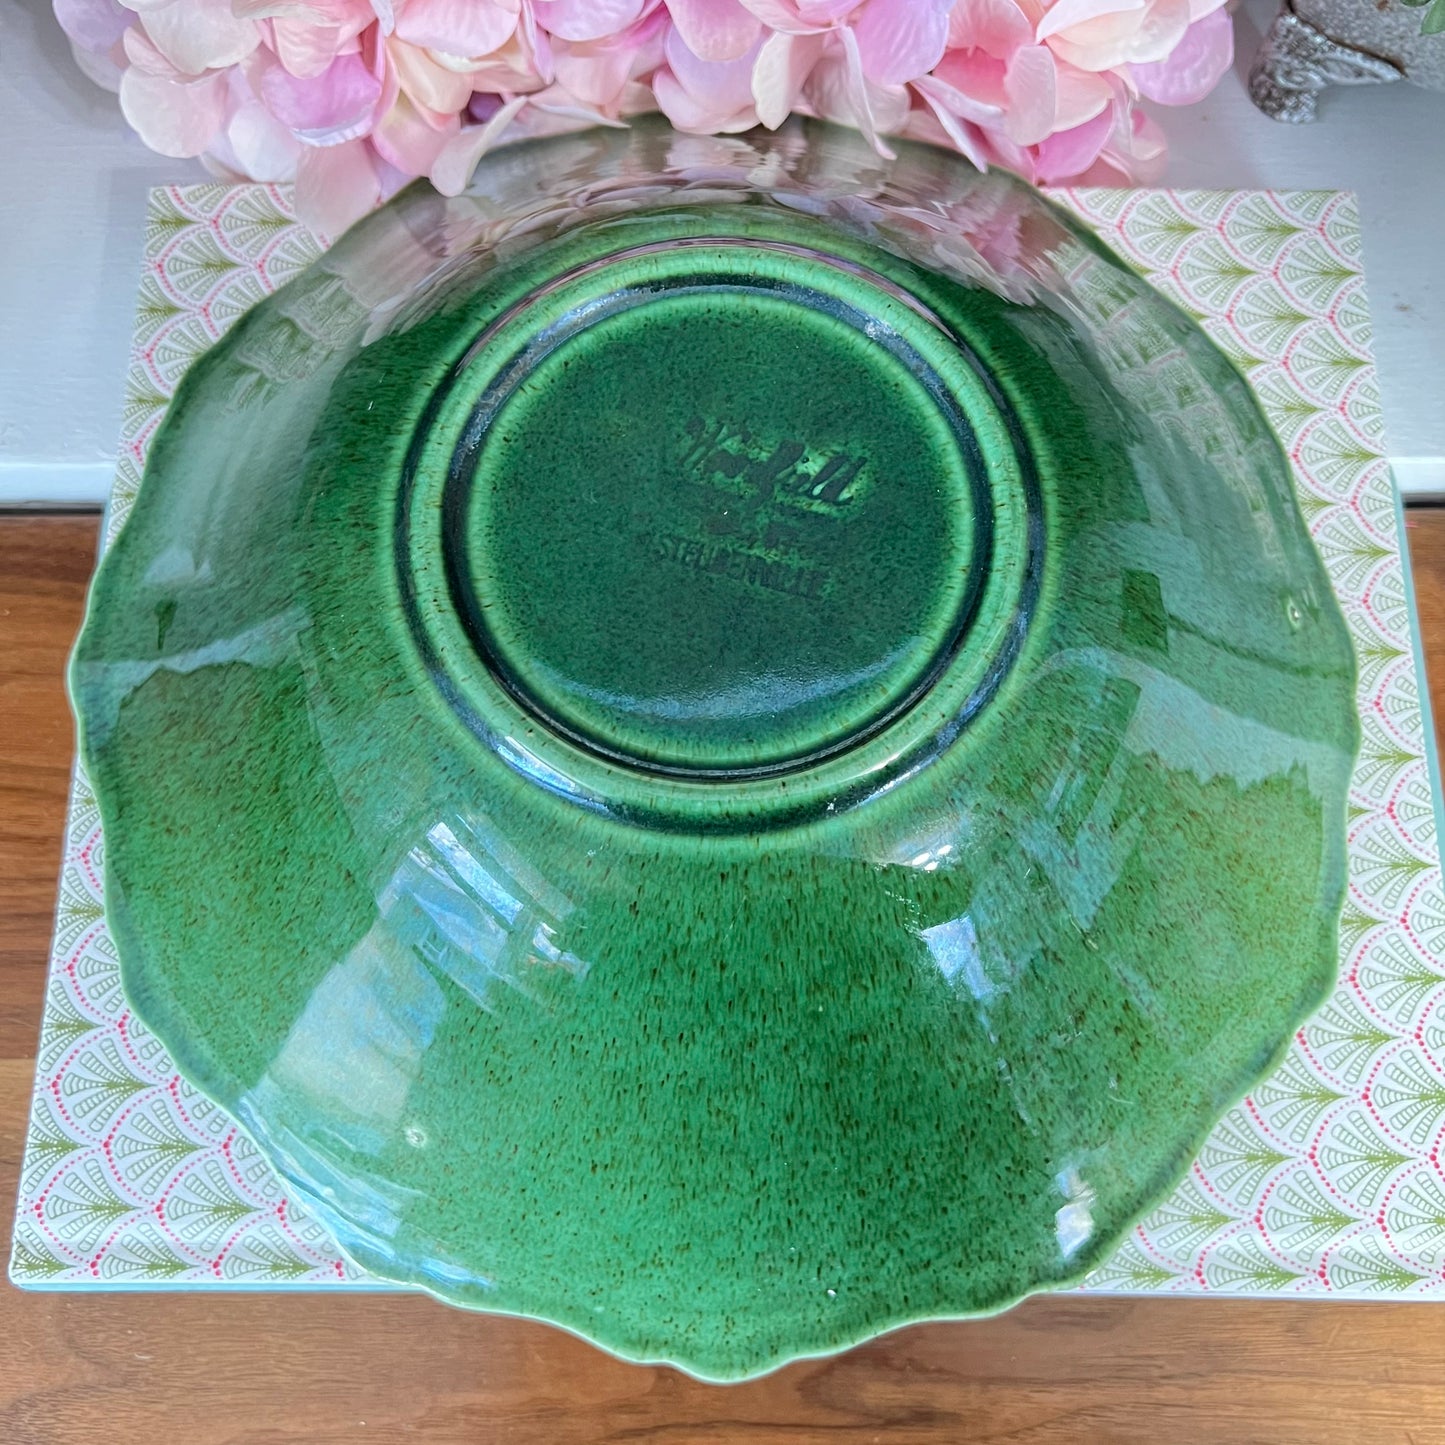 WOODFIELD Mfg By STEUBENVILLE LARGE LEAF Serving BOWL Green 11” Genuine Dish